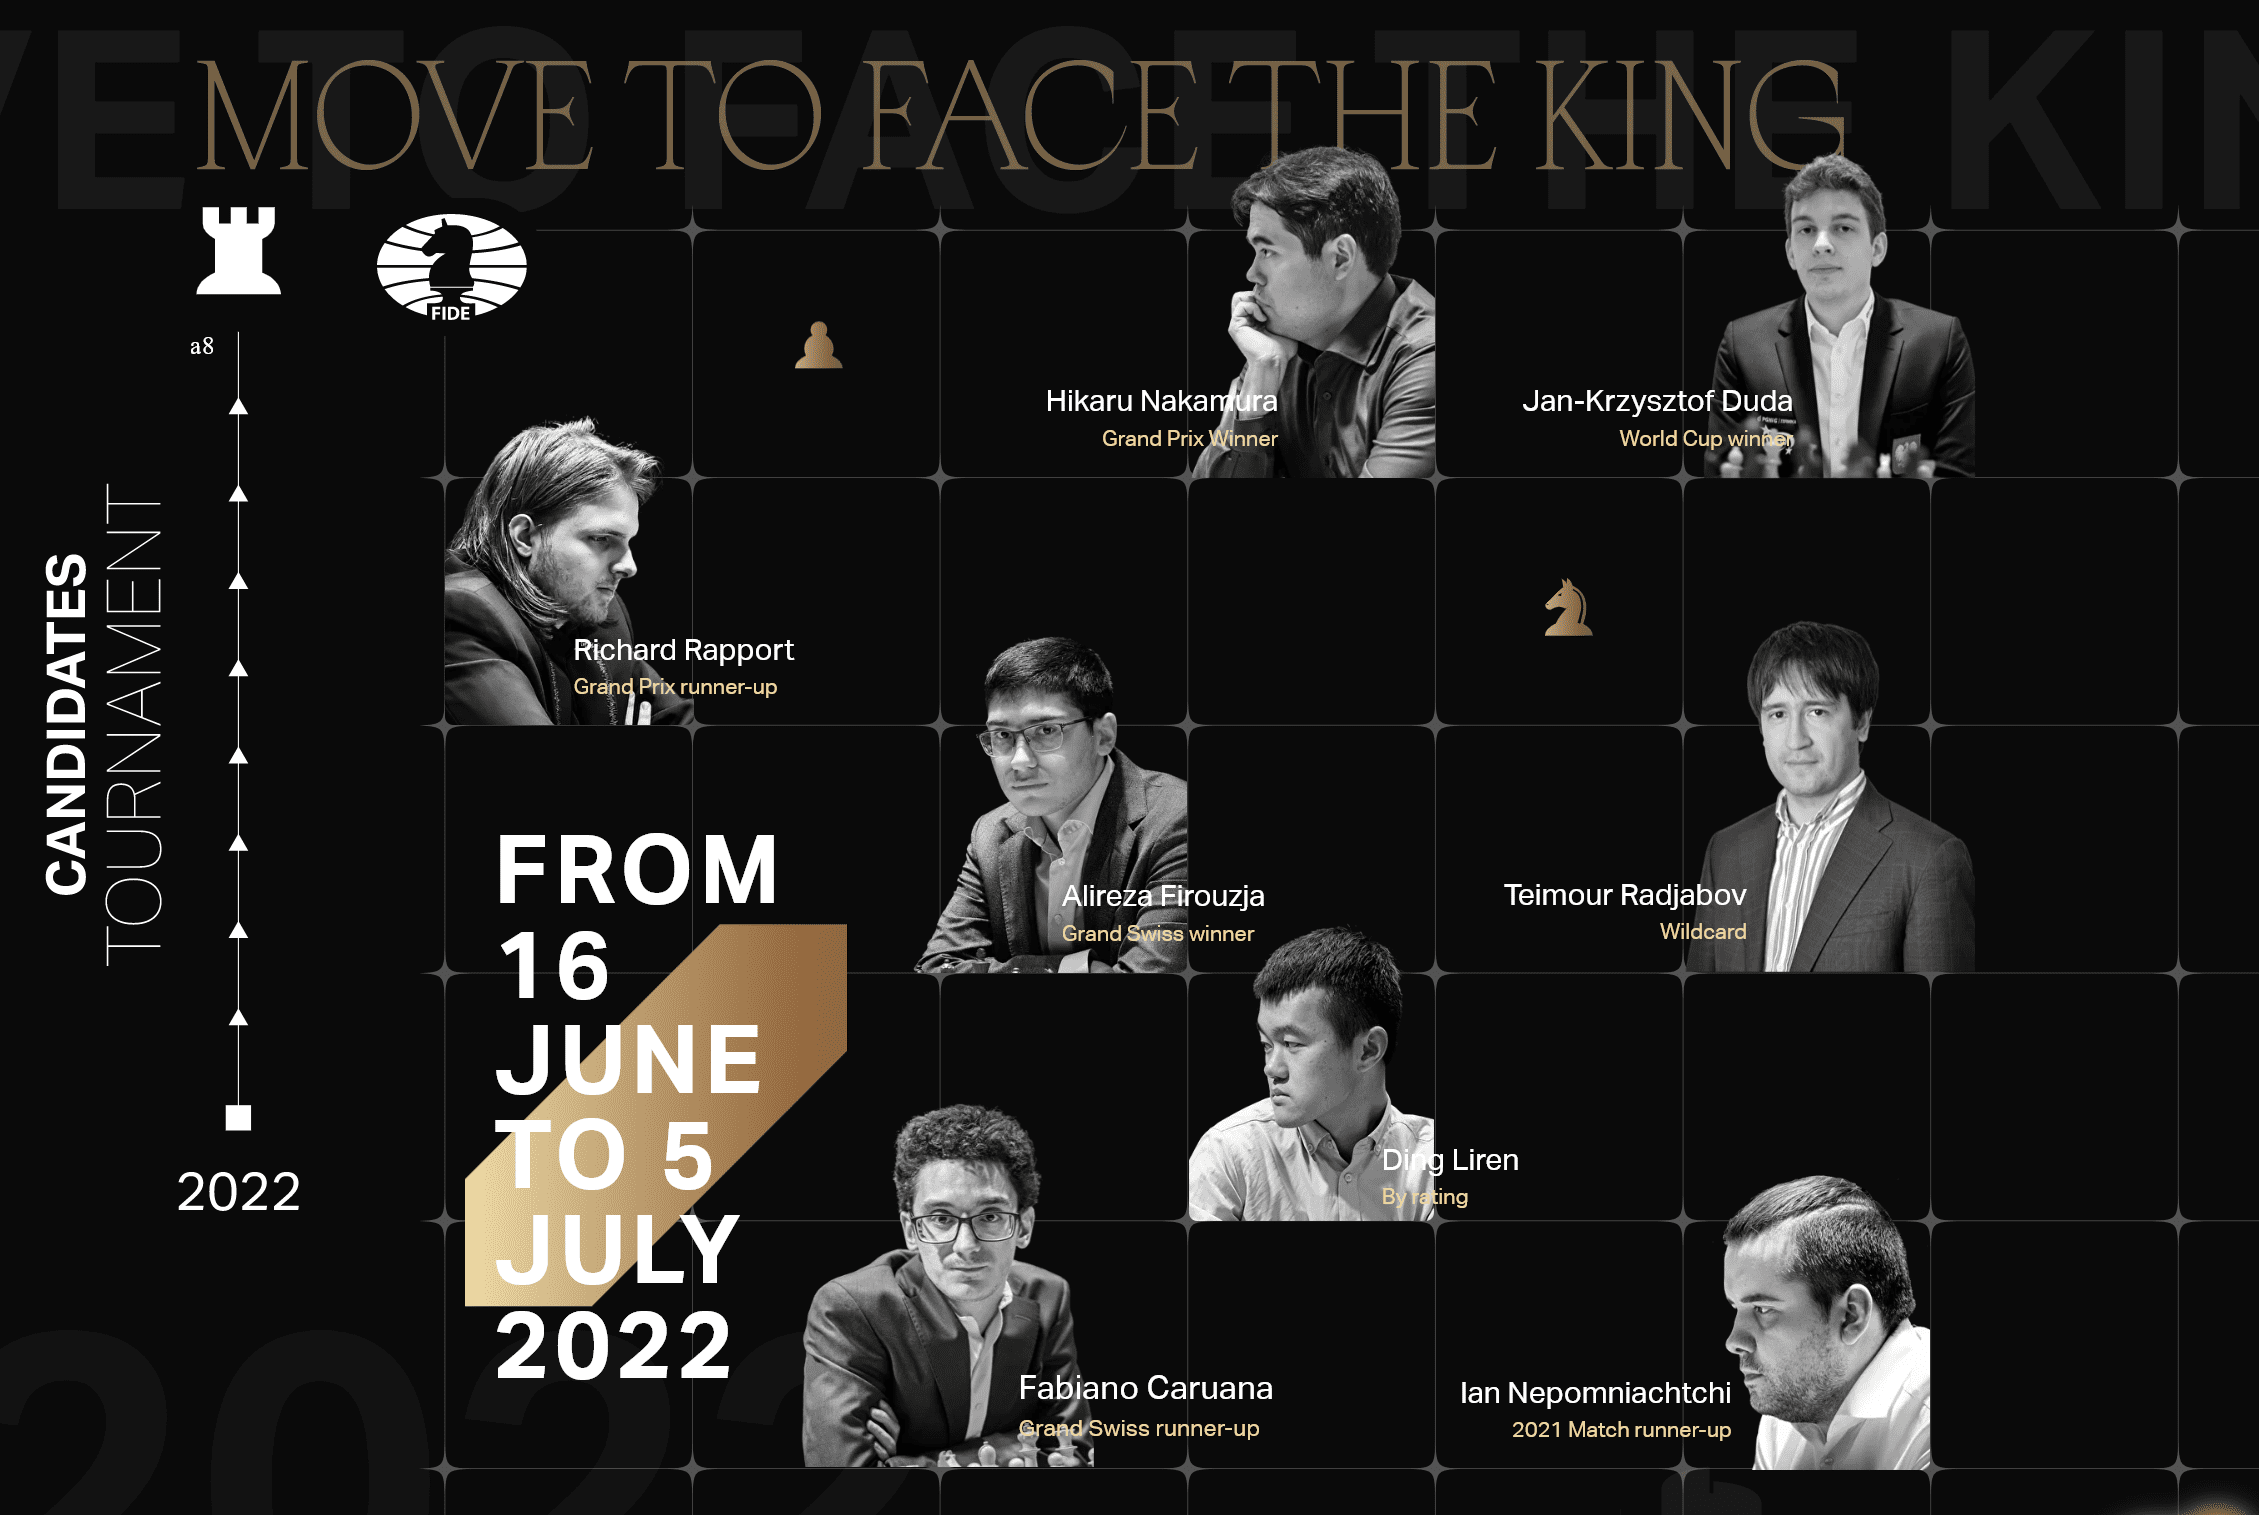 2022 Candidates Tournament (Madrid, Spain) - The Chess Drum